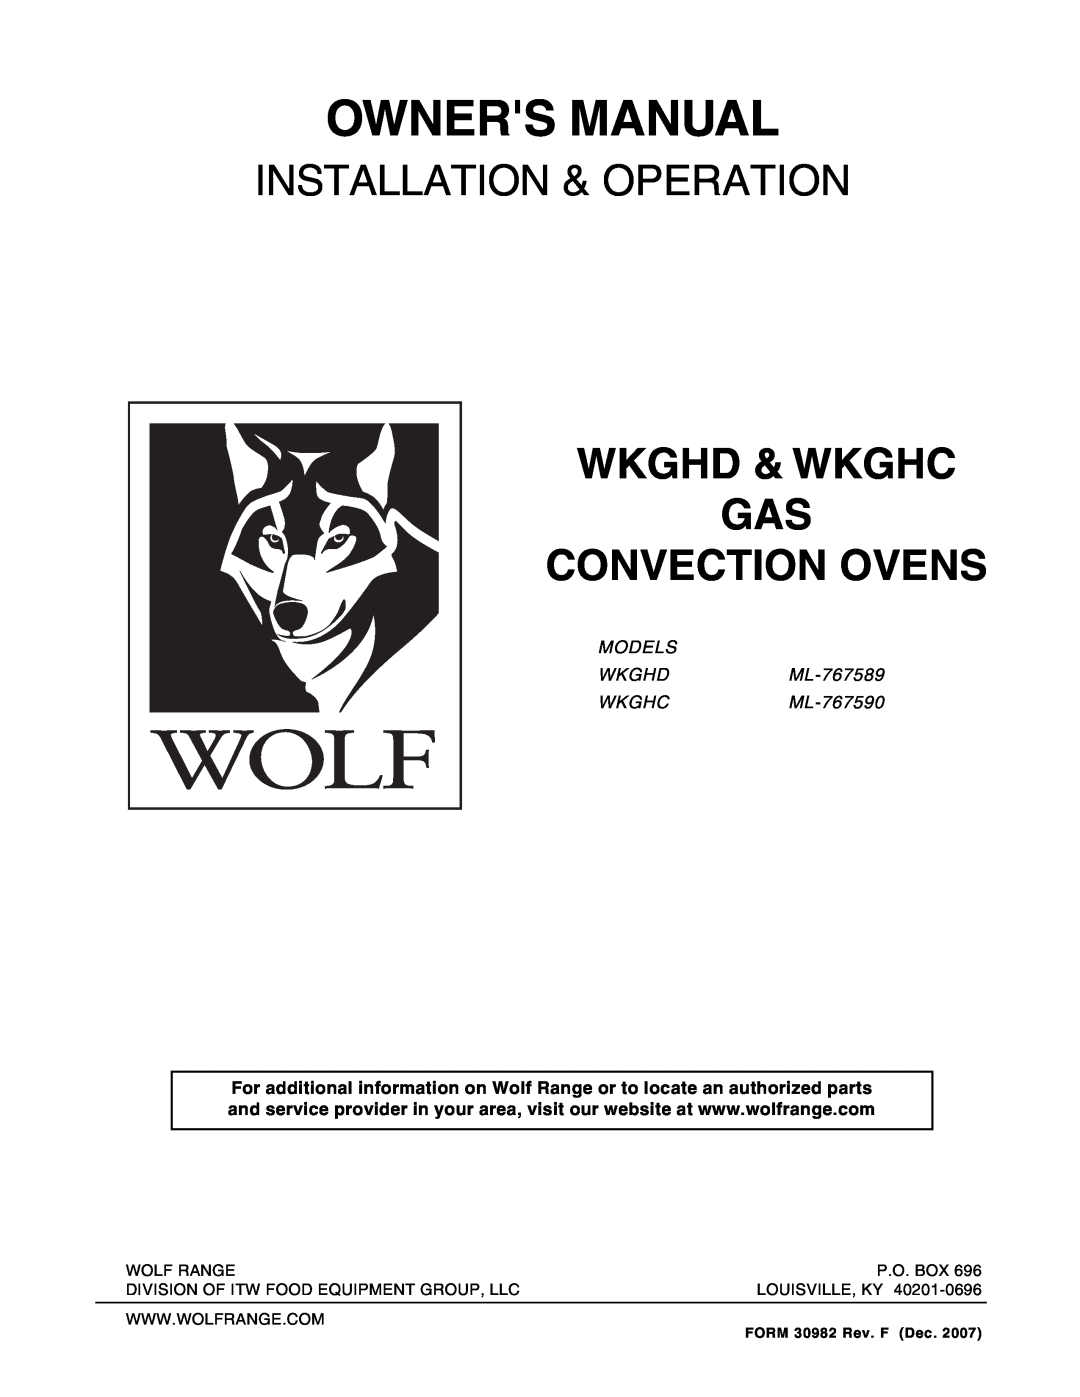 Wolf Appliance Company WKGHD ML-767589 owner manual Installation & Operation, Wkghd & Wkghc Gas Convection Ovens 